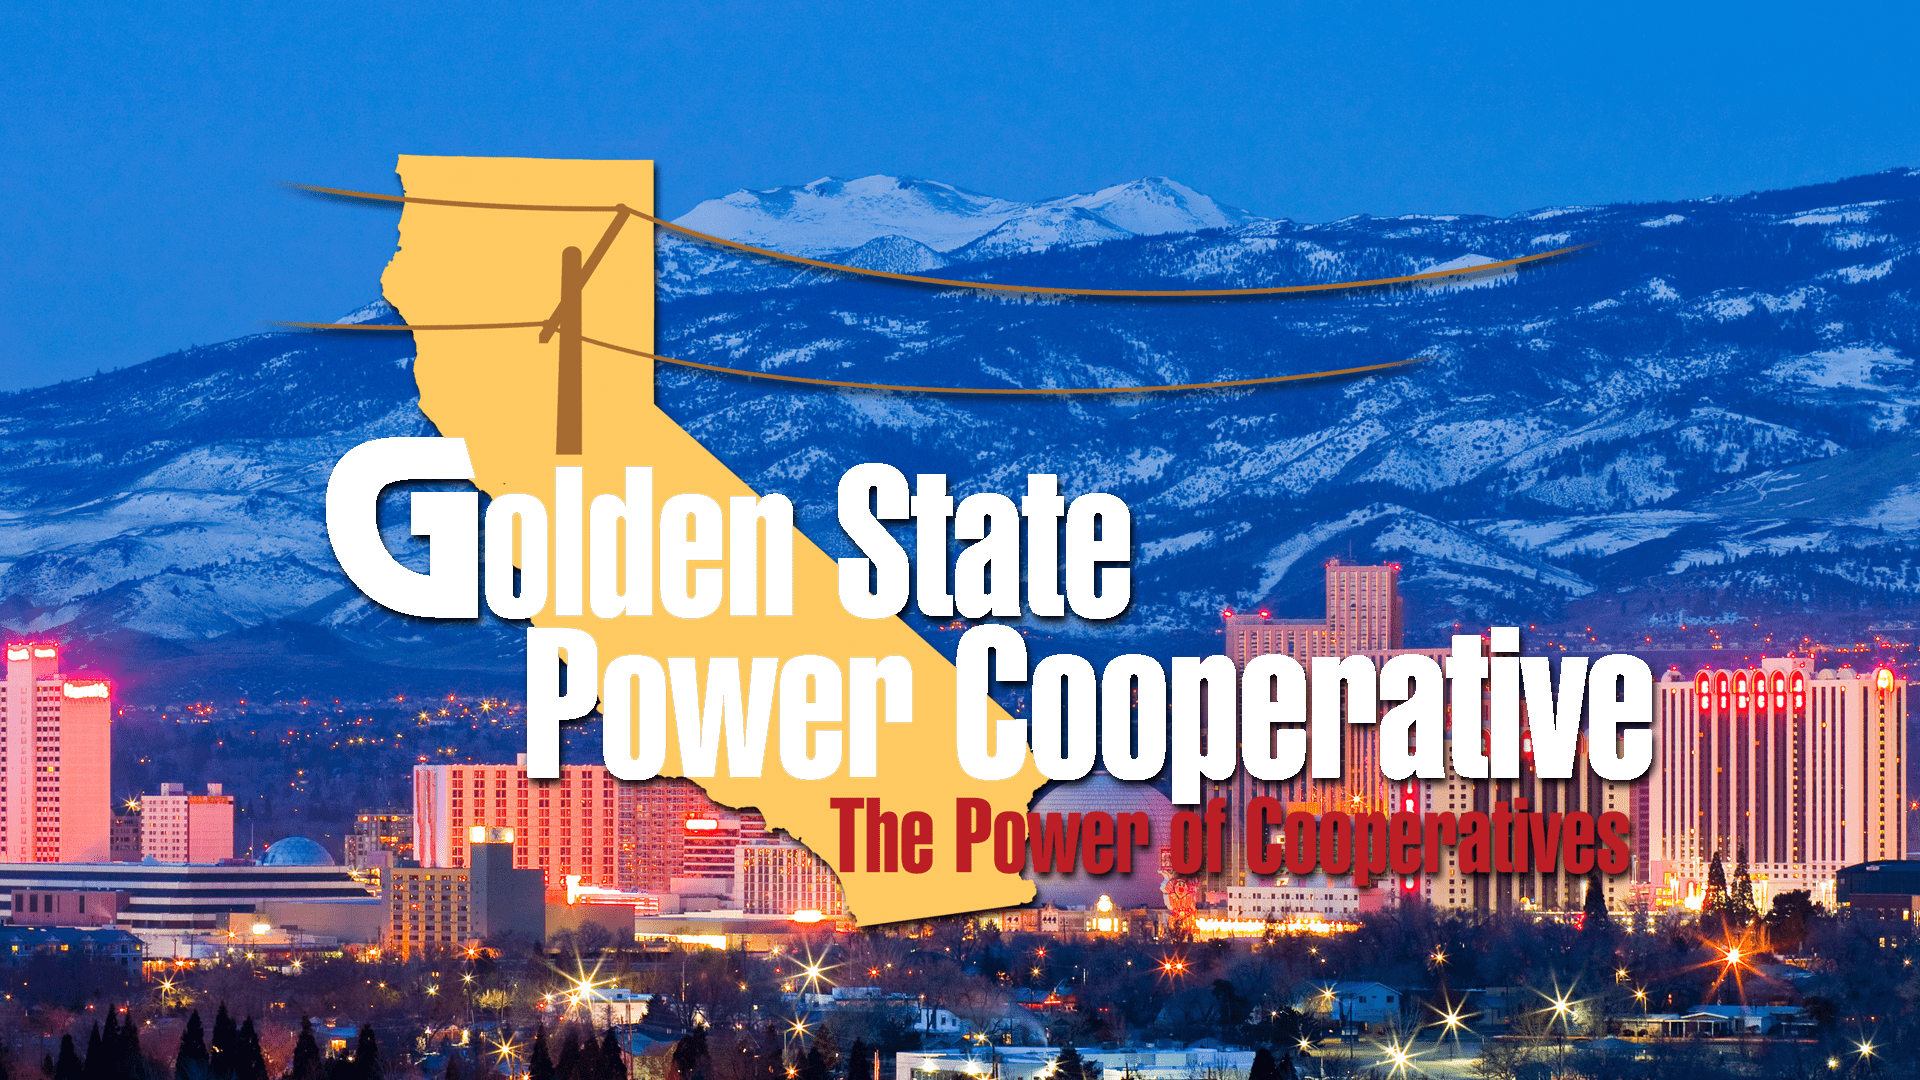 Golden State Power Cooperatives Annual Meeting, Reno, NV